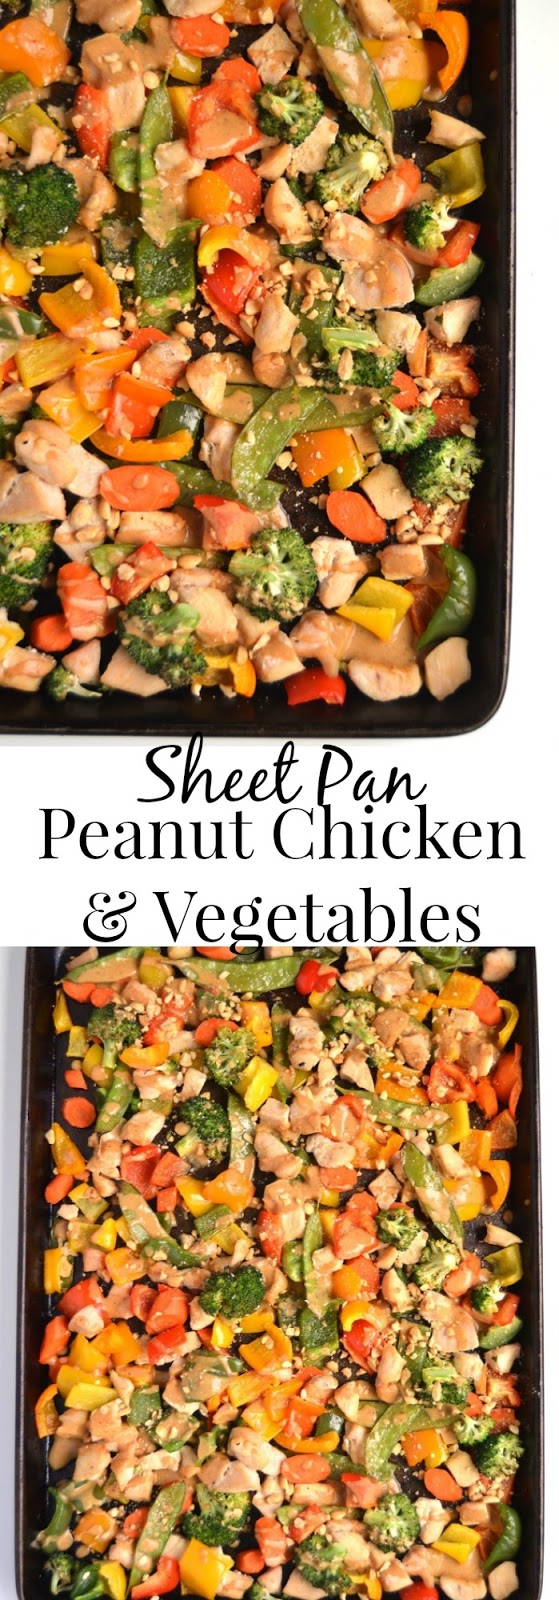 Sheet Pan Peanut Chicken and Vegetables is a simple dinner cooked all on one pan for less dishes and work! Ready in 30 minutes including broccoli, bell peppers, carrots and pea pods all covered in a flavorful peanut dressing! www.nutritionistreviews.com